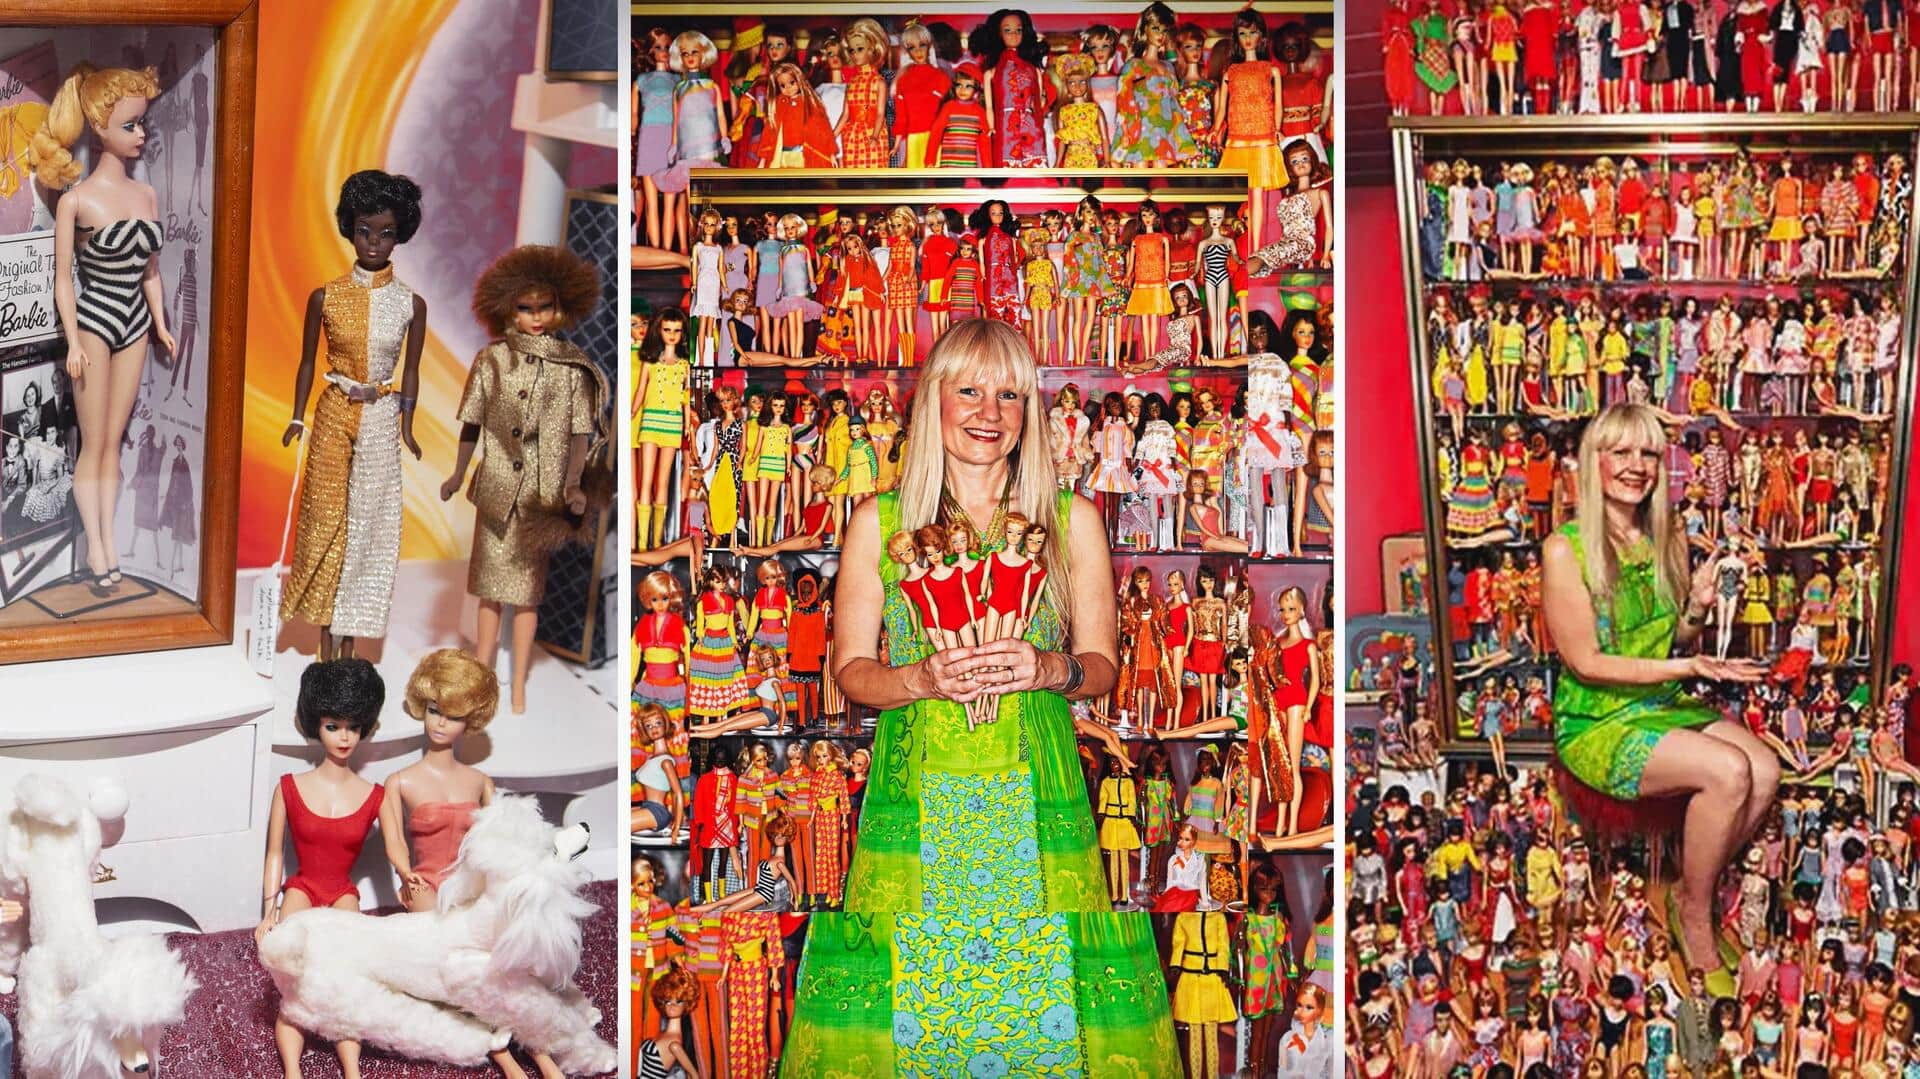 This 'Barbie doctor' has a collection of 18,500 dolls